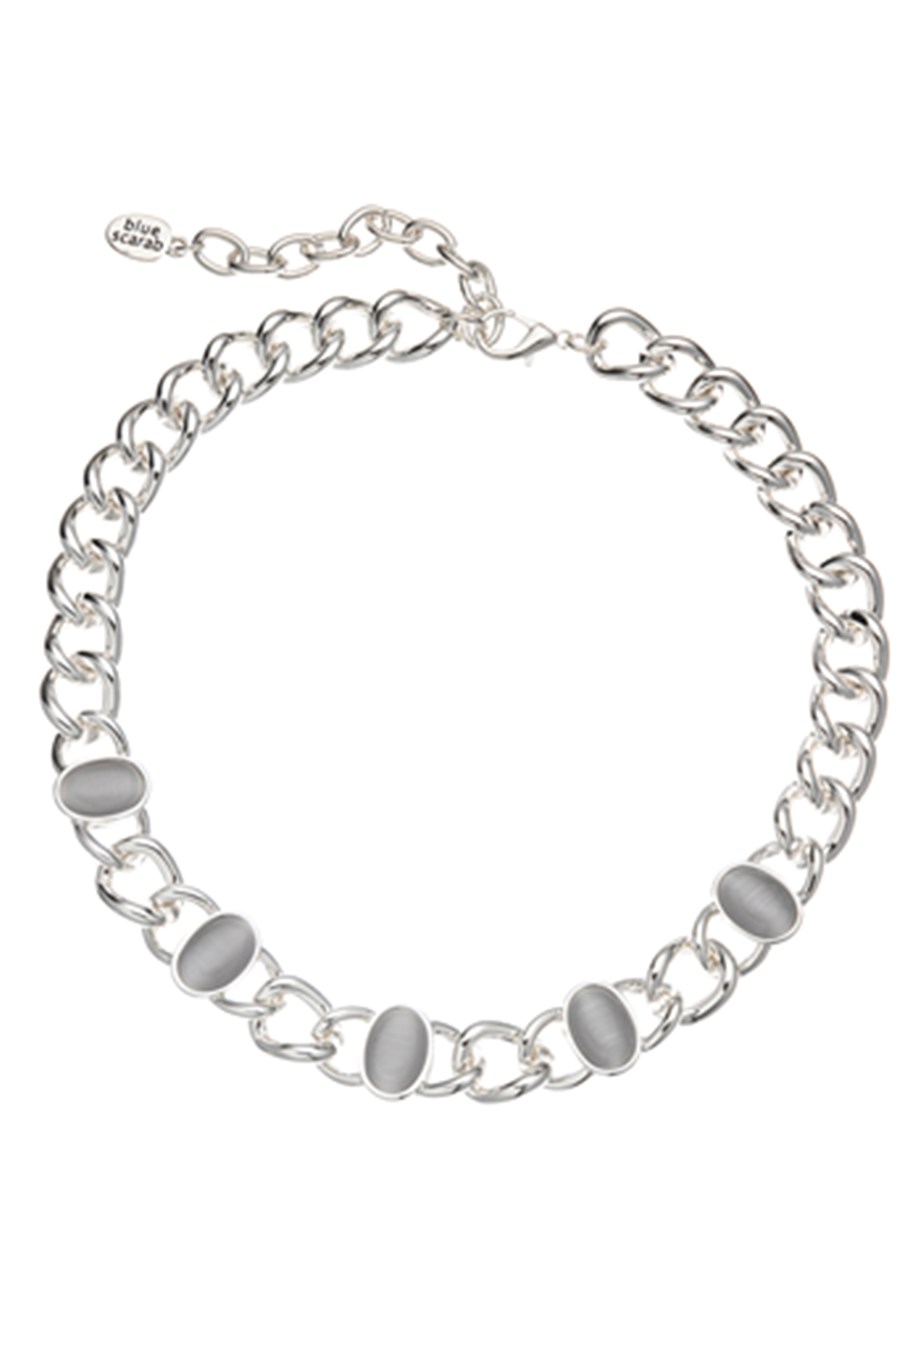 NECKLACE SILVER CHAIN N042128